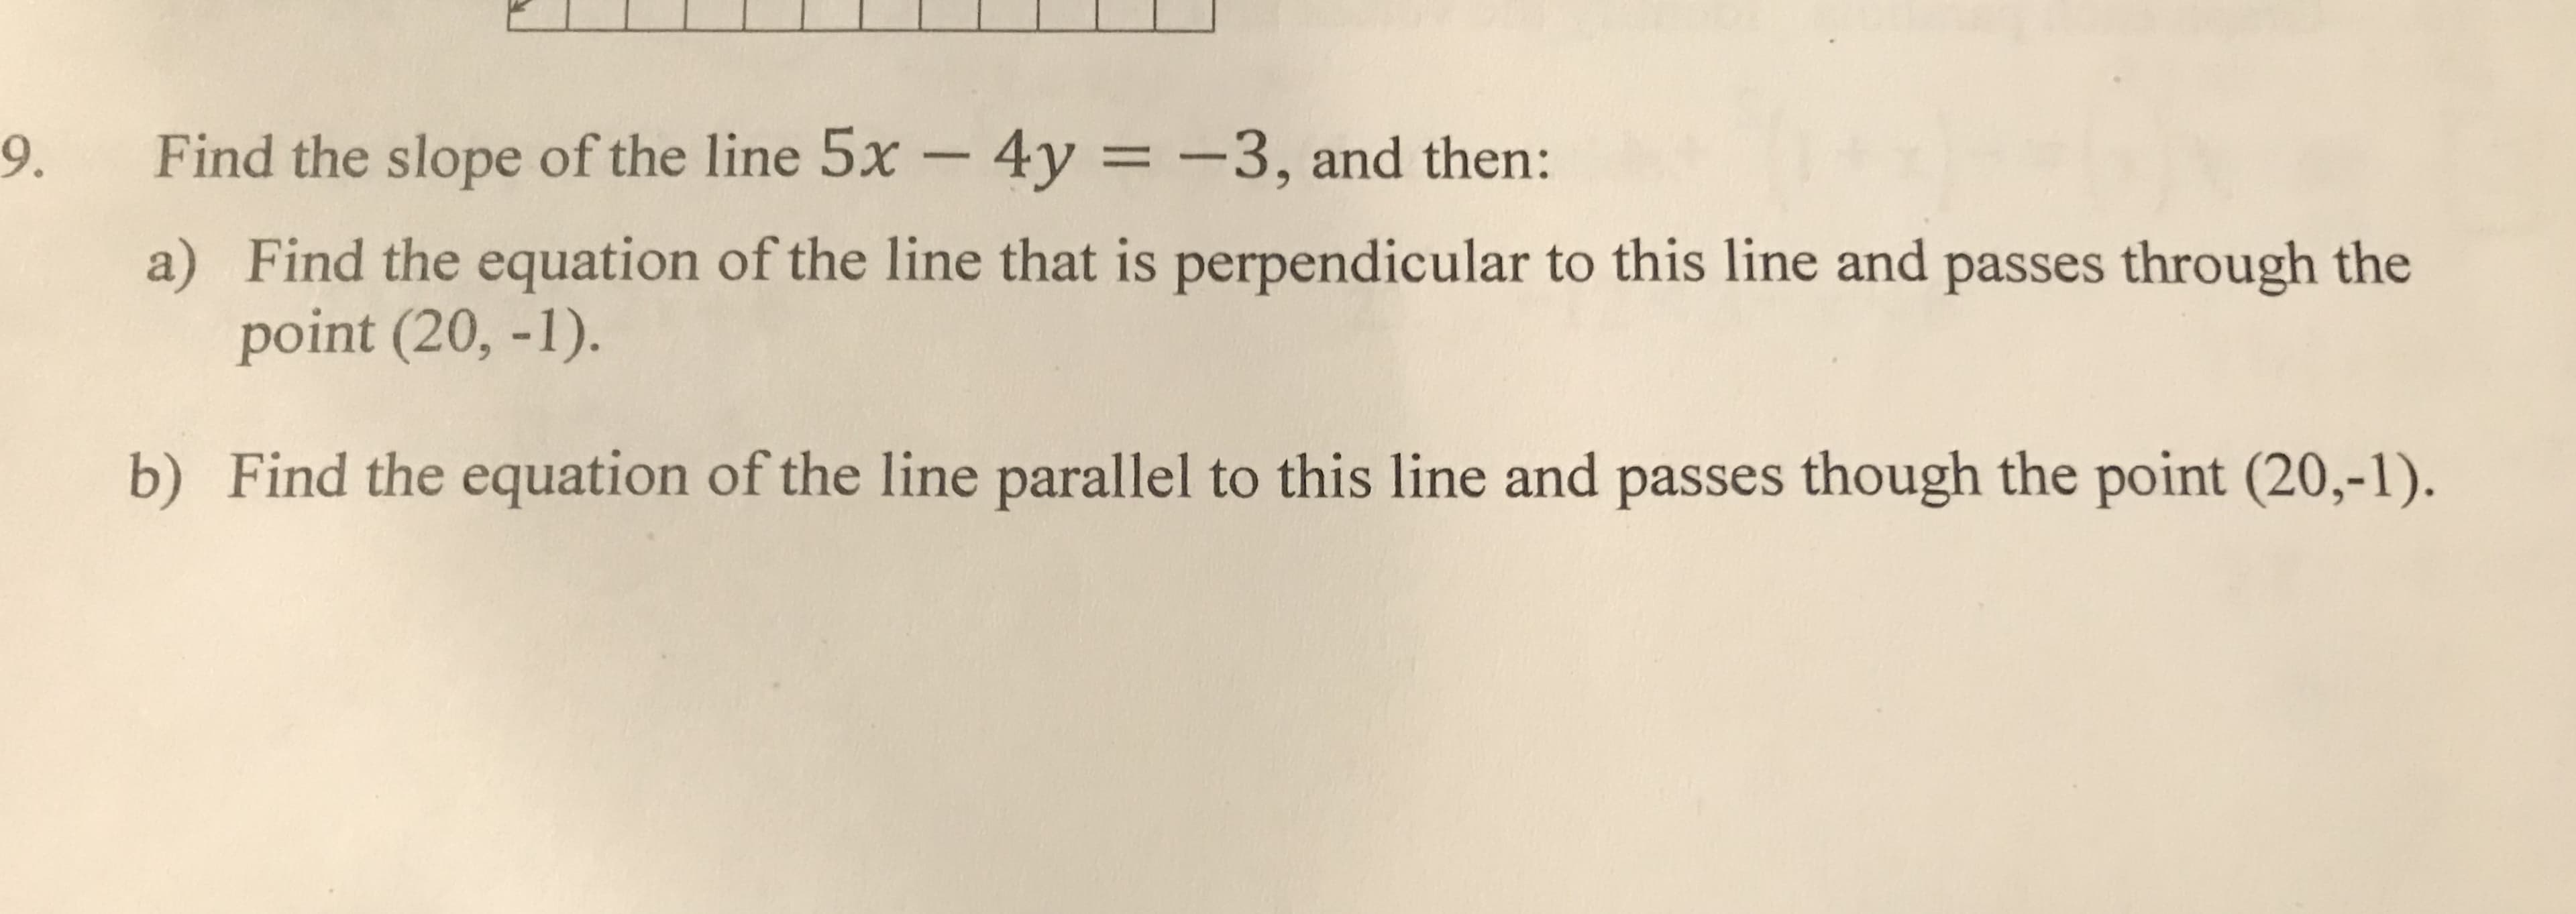 Find the slope of the line 5x - 4y = -3, and then:
9.
%3D
a) Find the equation of the line that is perpendicular to this line and passes through the
point (20, -1).
b) Find the equation of the line parallel to this line and passes though the point (20,-1).
